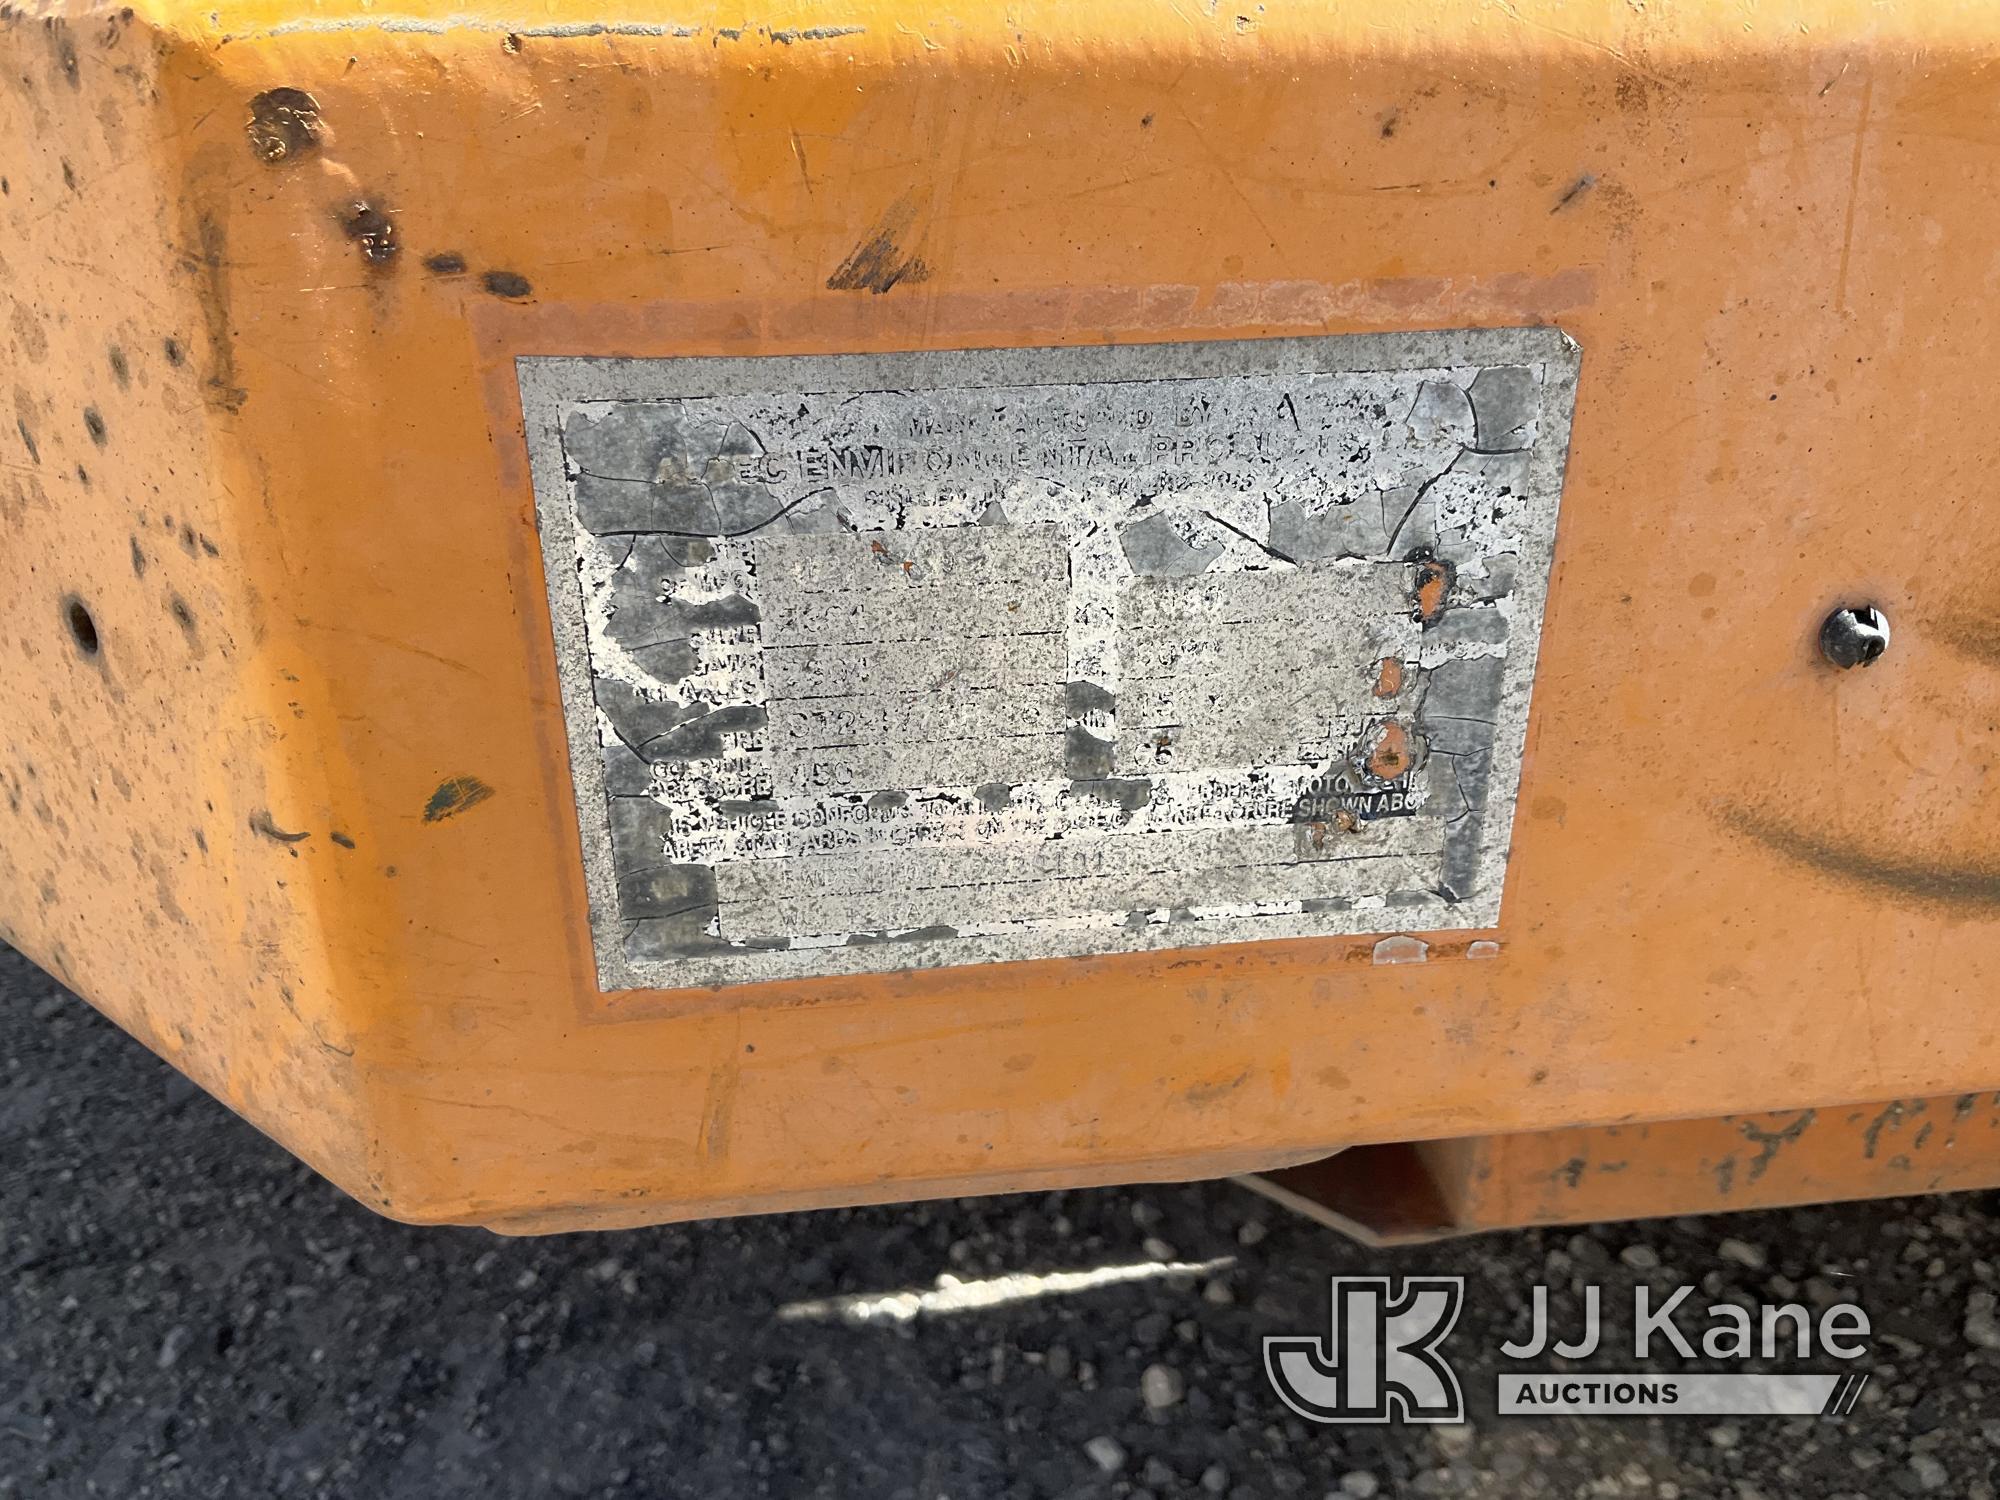 (Jurupa Valley, CA) 2009 Altec WC126A Chipper (12in Drum) Not Running, Engine Blown.  Coolant In Oil